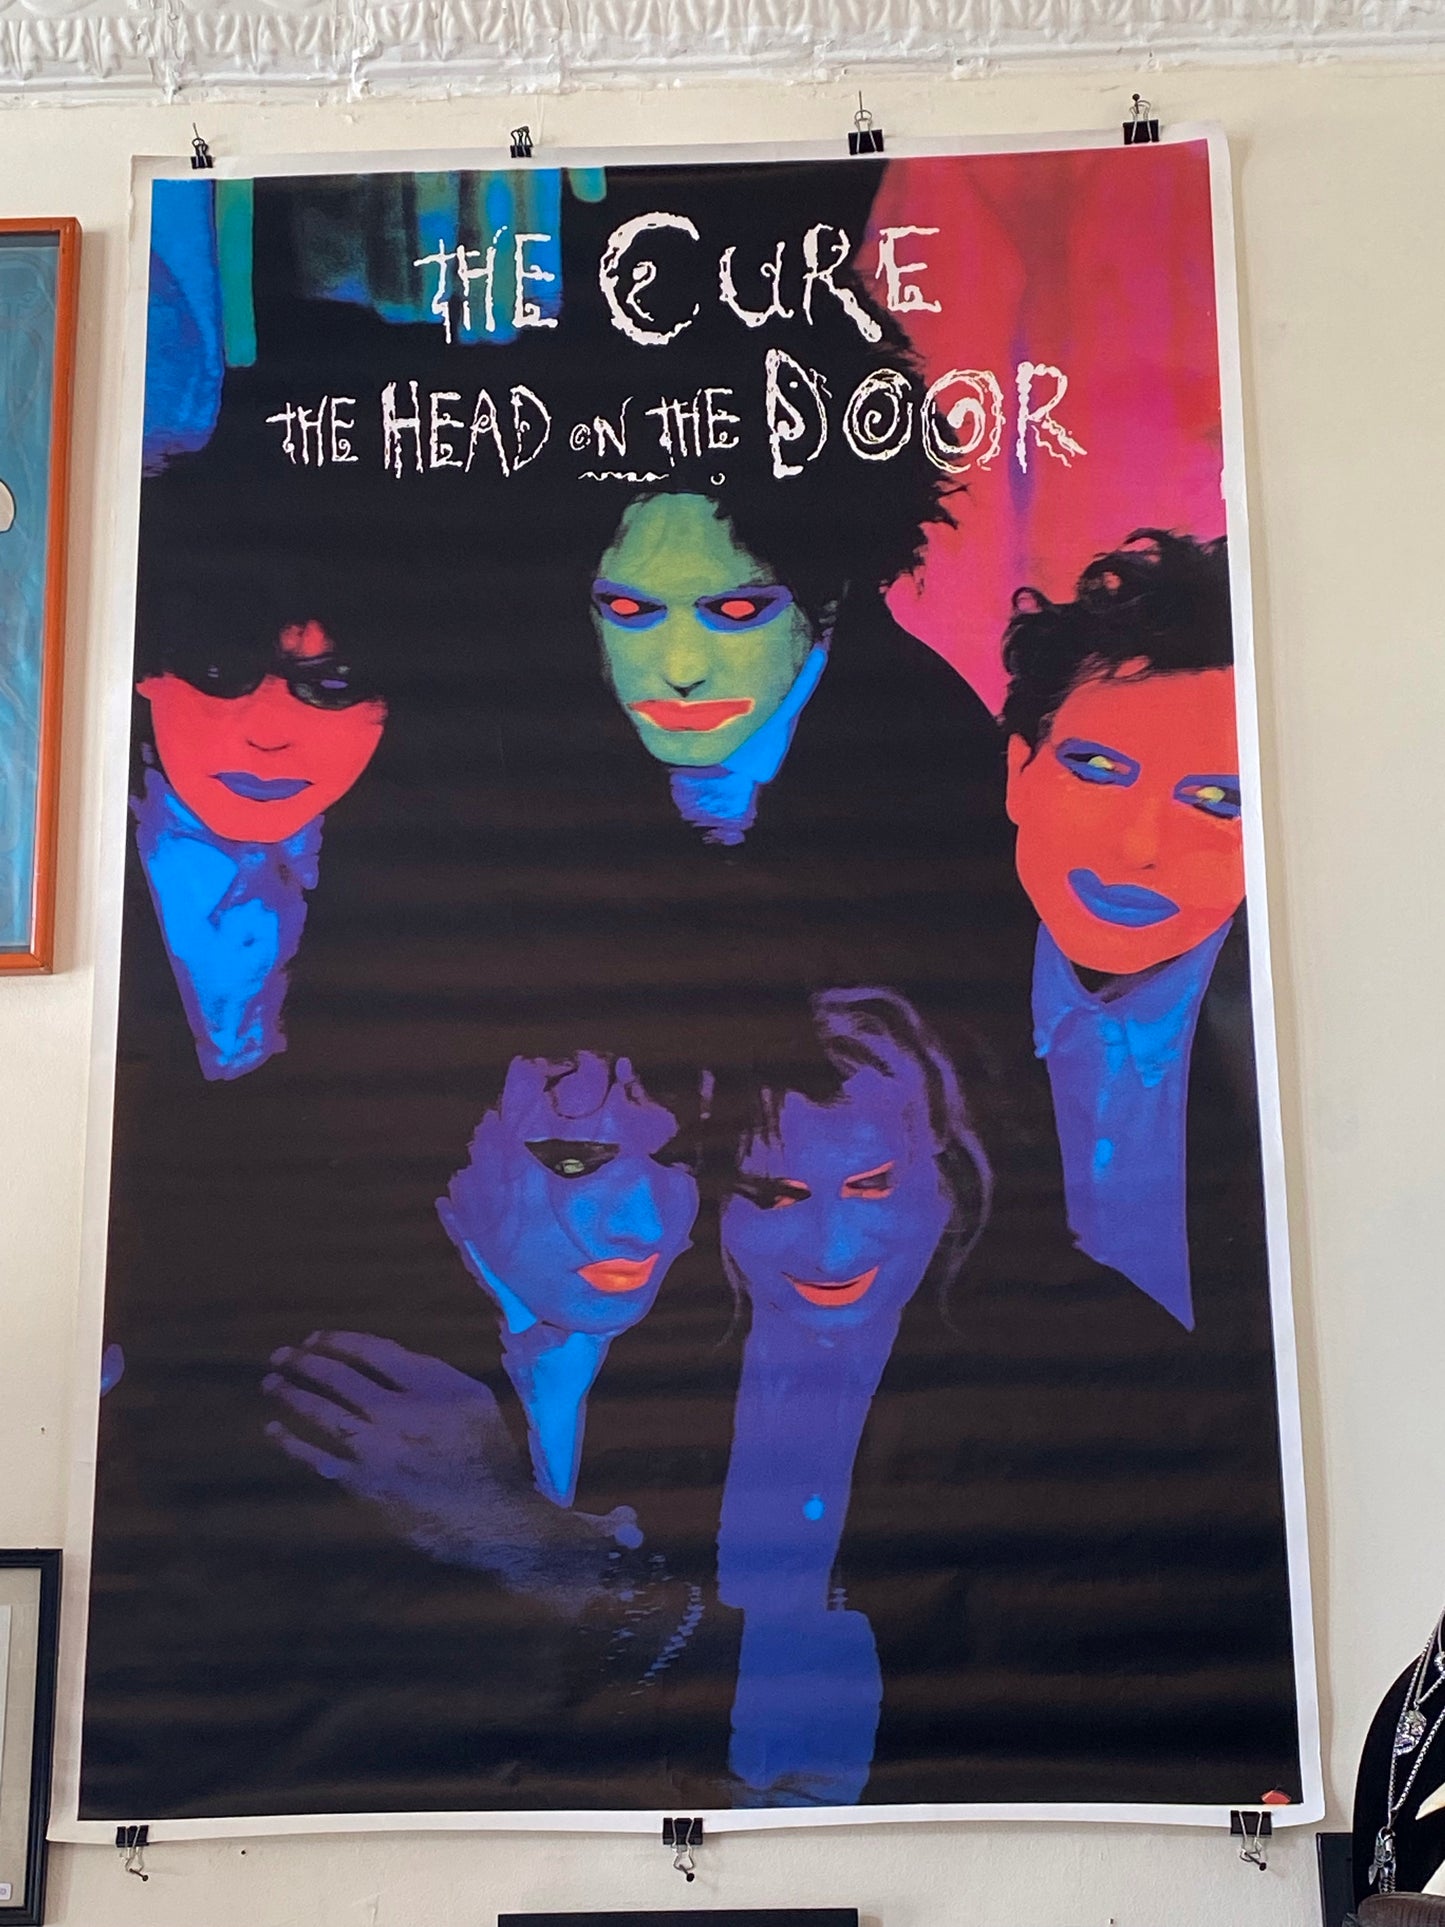 80’s The Cure “The Head on the Door” XL Album Poster